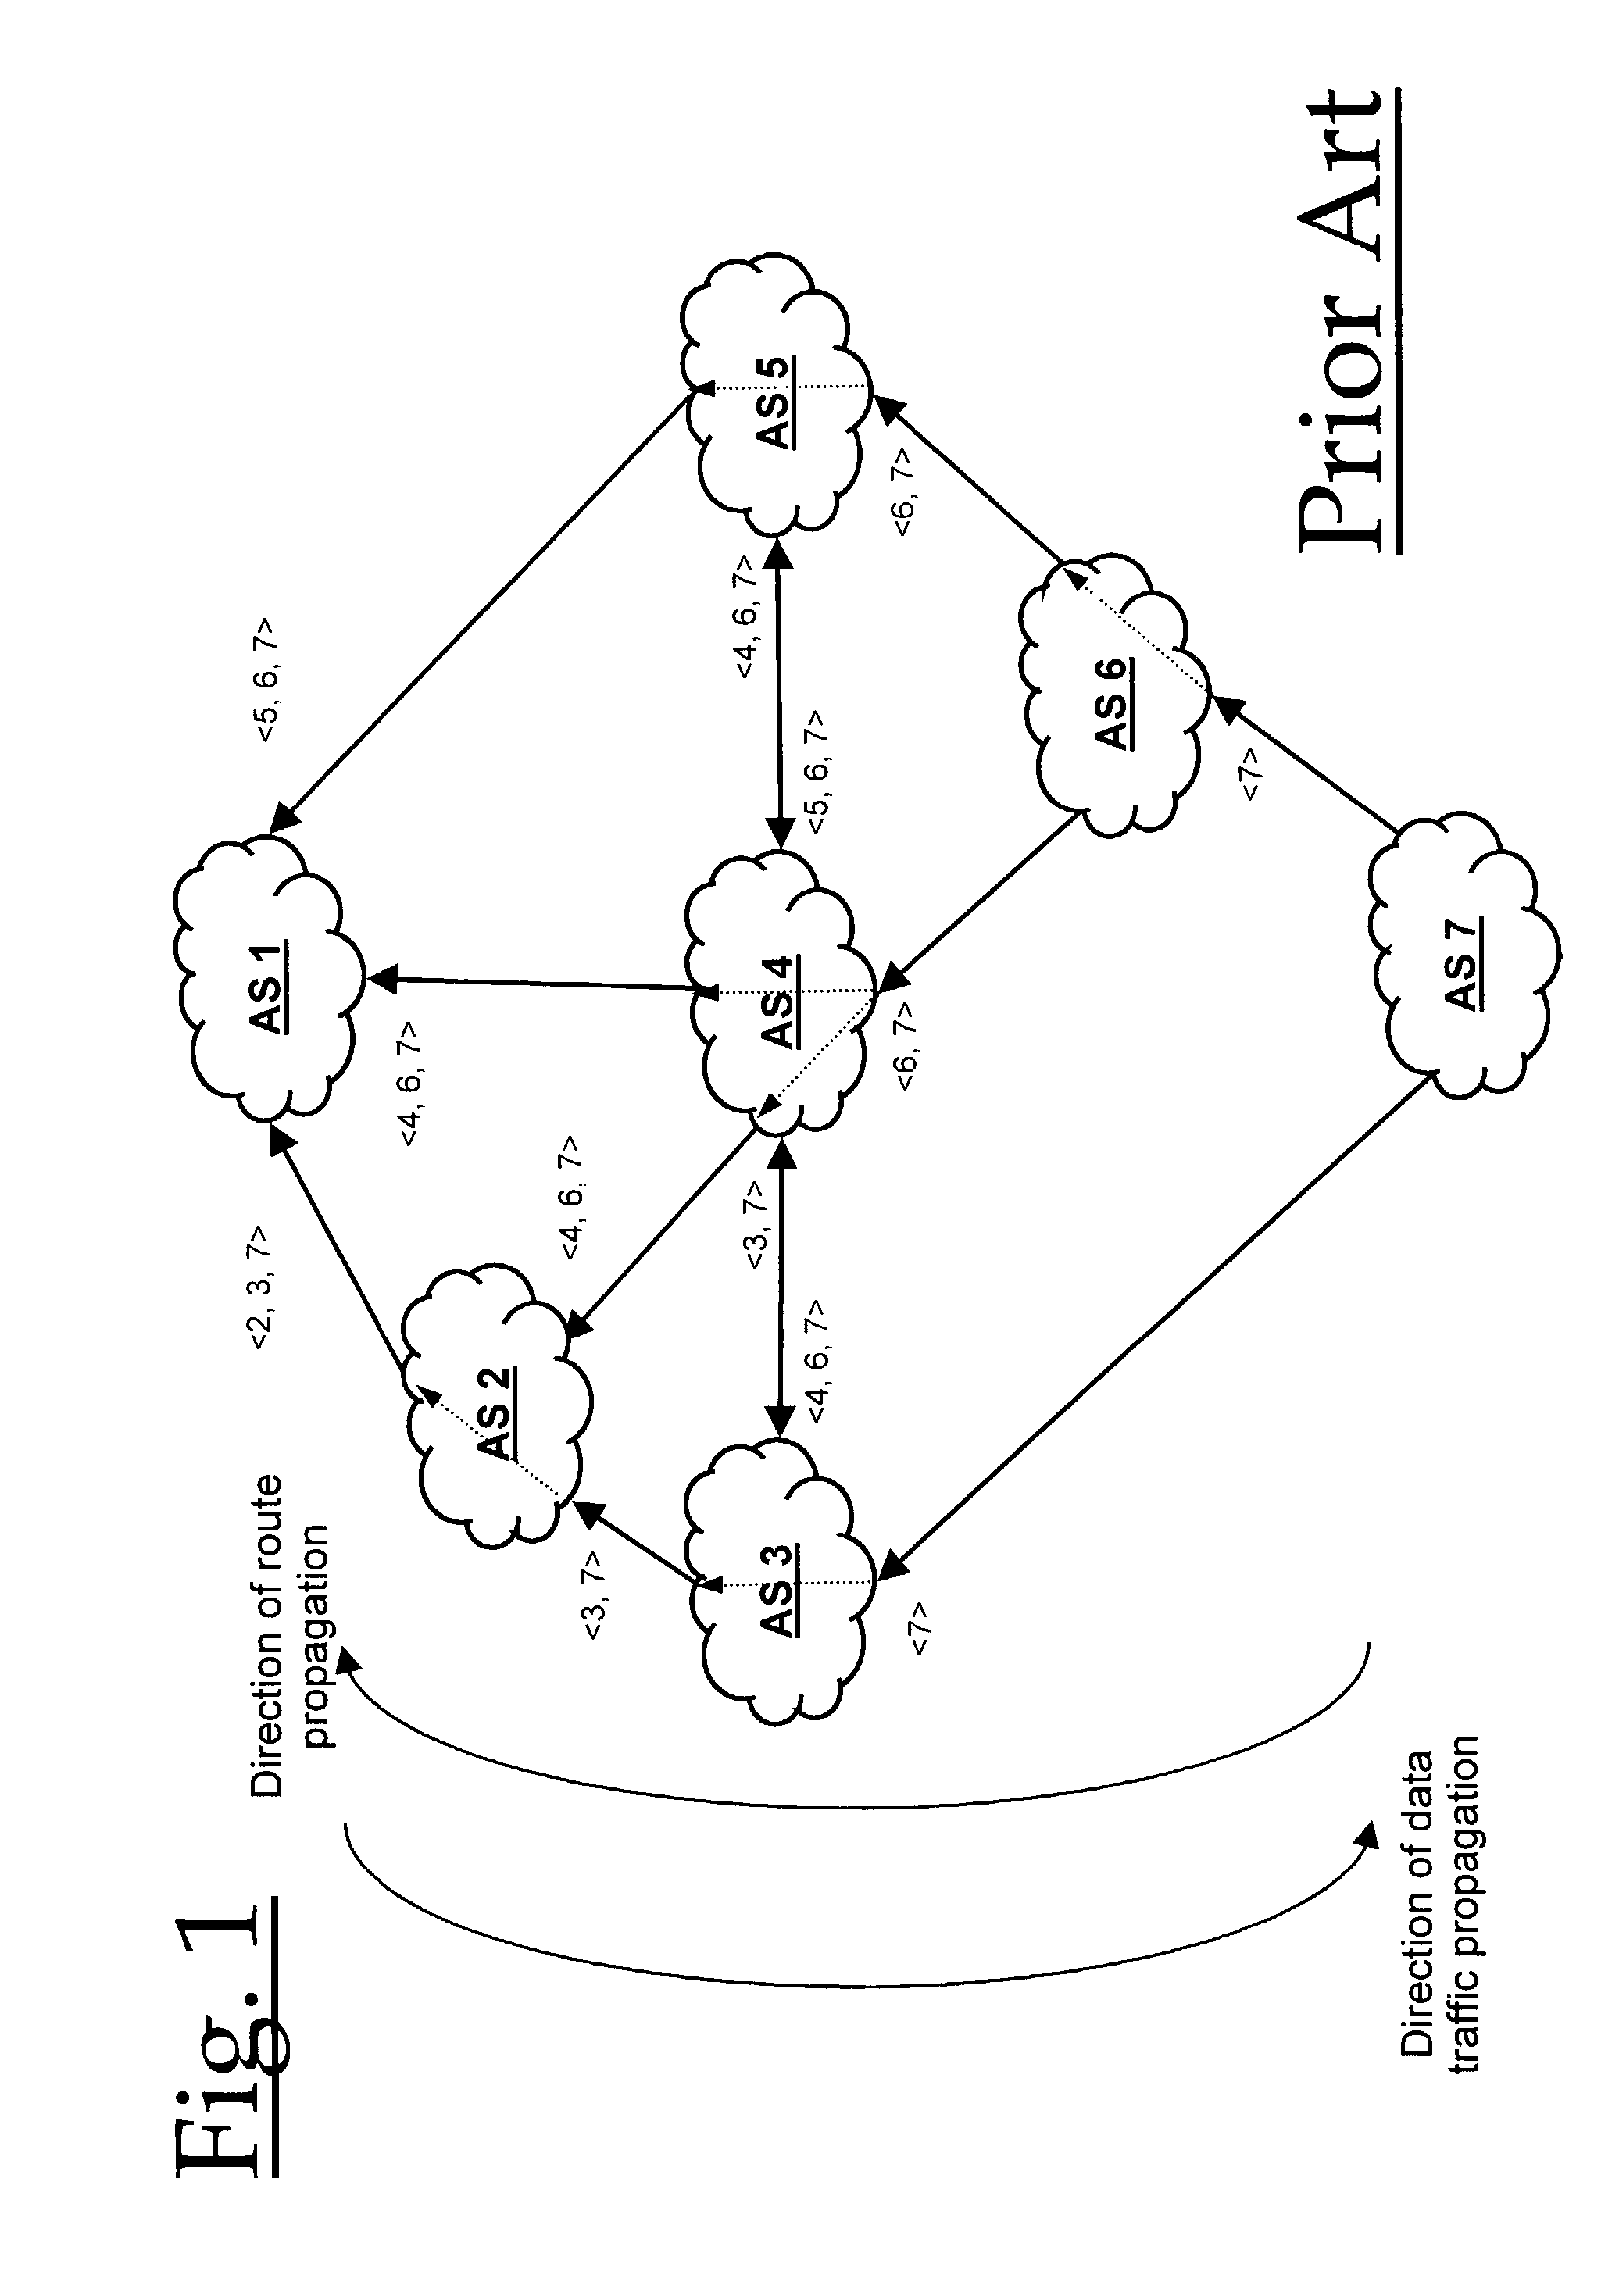 Routing for a communications network